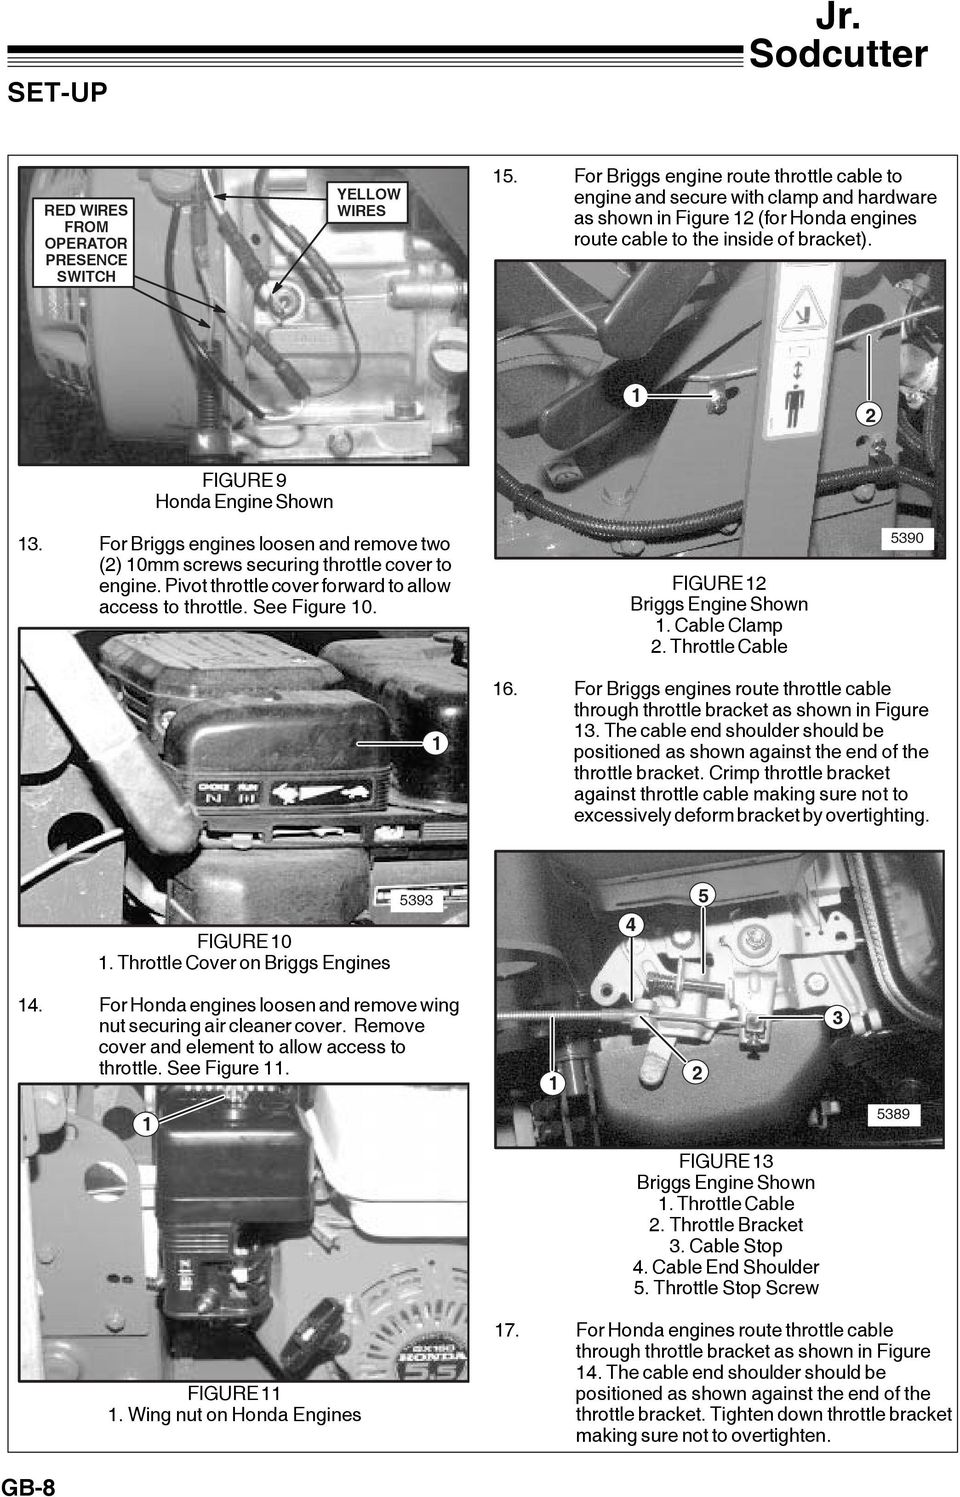 For Briggs engines loosen and remove two () 0mm screws securing throttle cover to engine. Pivot throttle cover forward to allow access to throttle. See Figure 0. FIGURE Briggs Engine Shown.